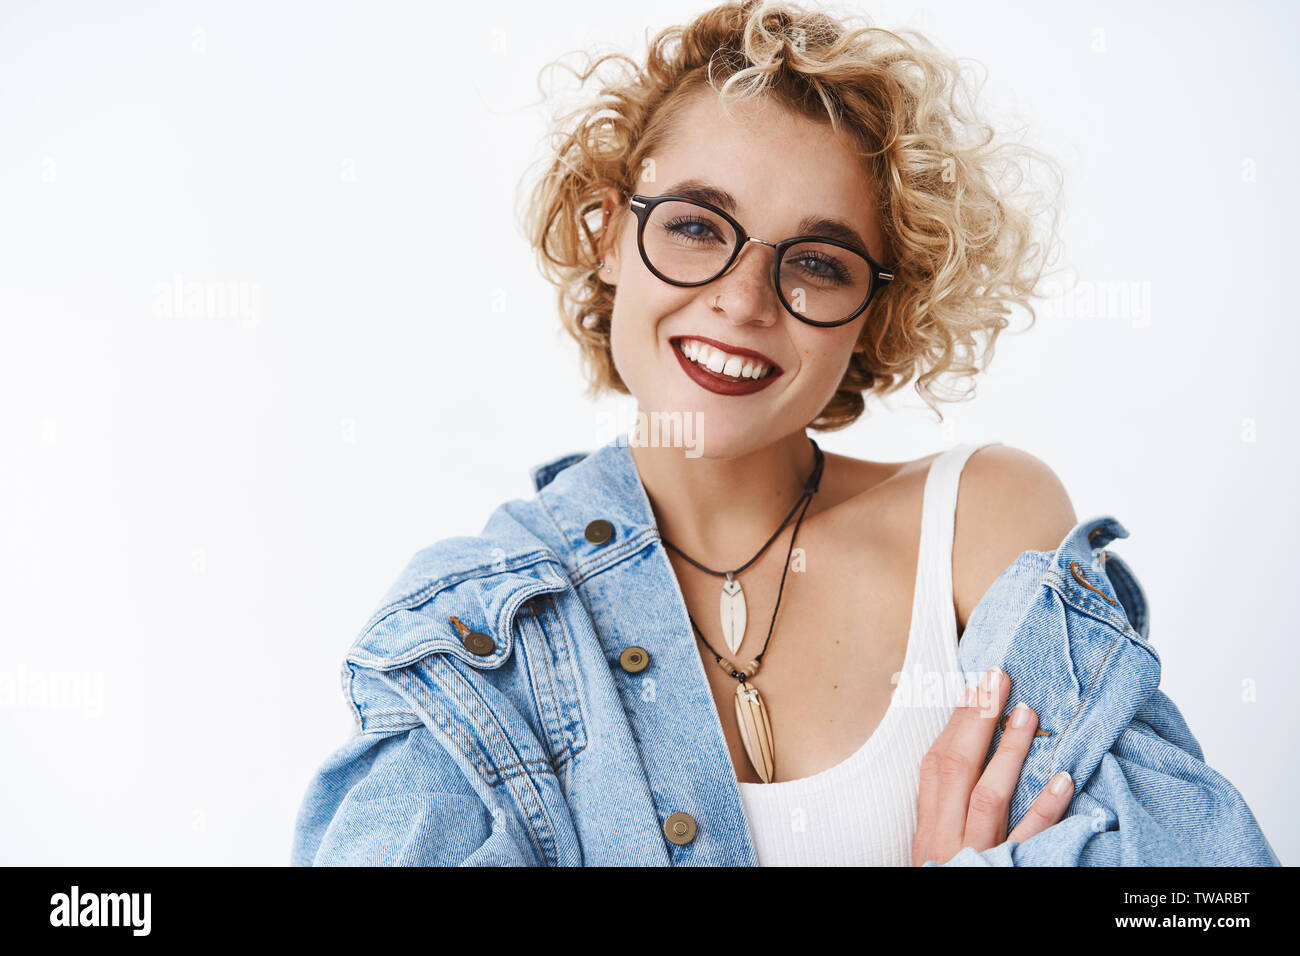 Happy delighted and attractive blond female with short curly hairstyle freckles and pierced nose wearing lipstick smiling joyfully tilting head Stock Photo